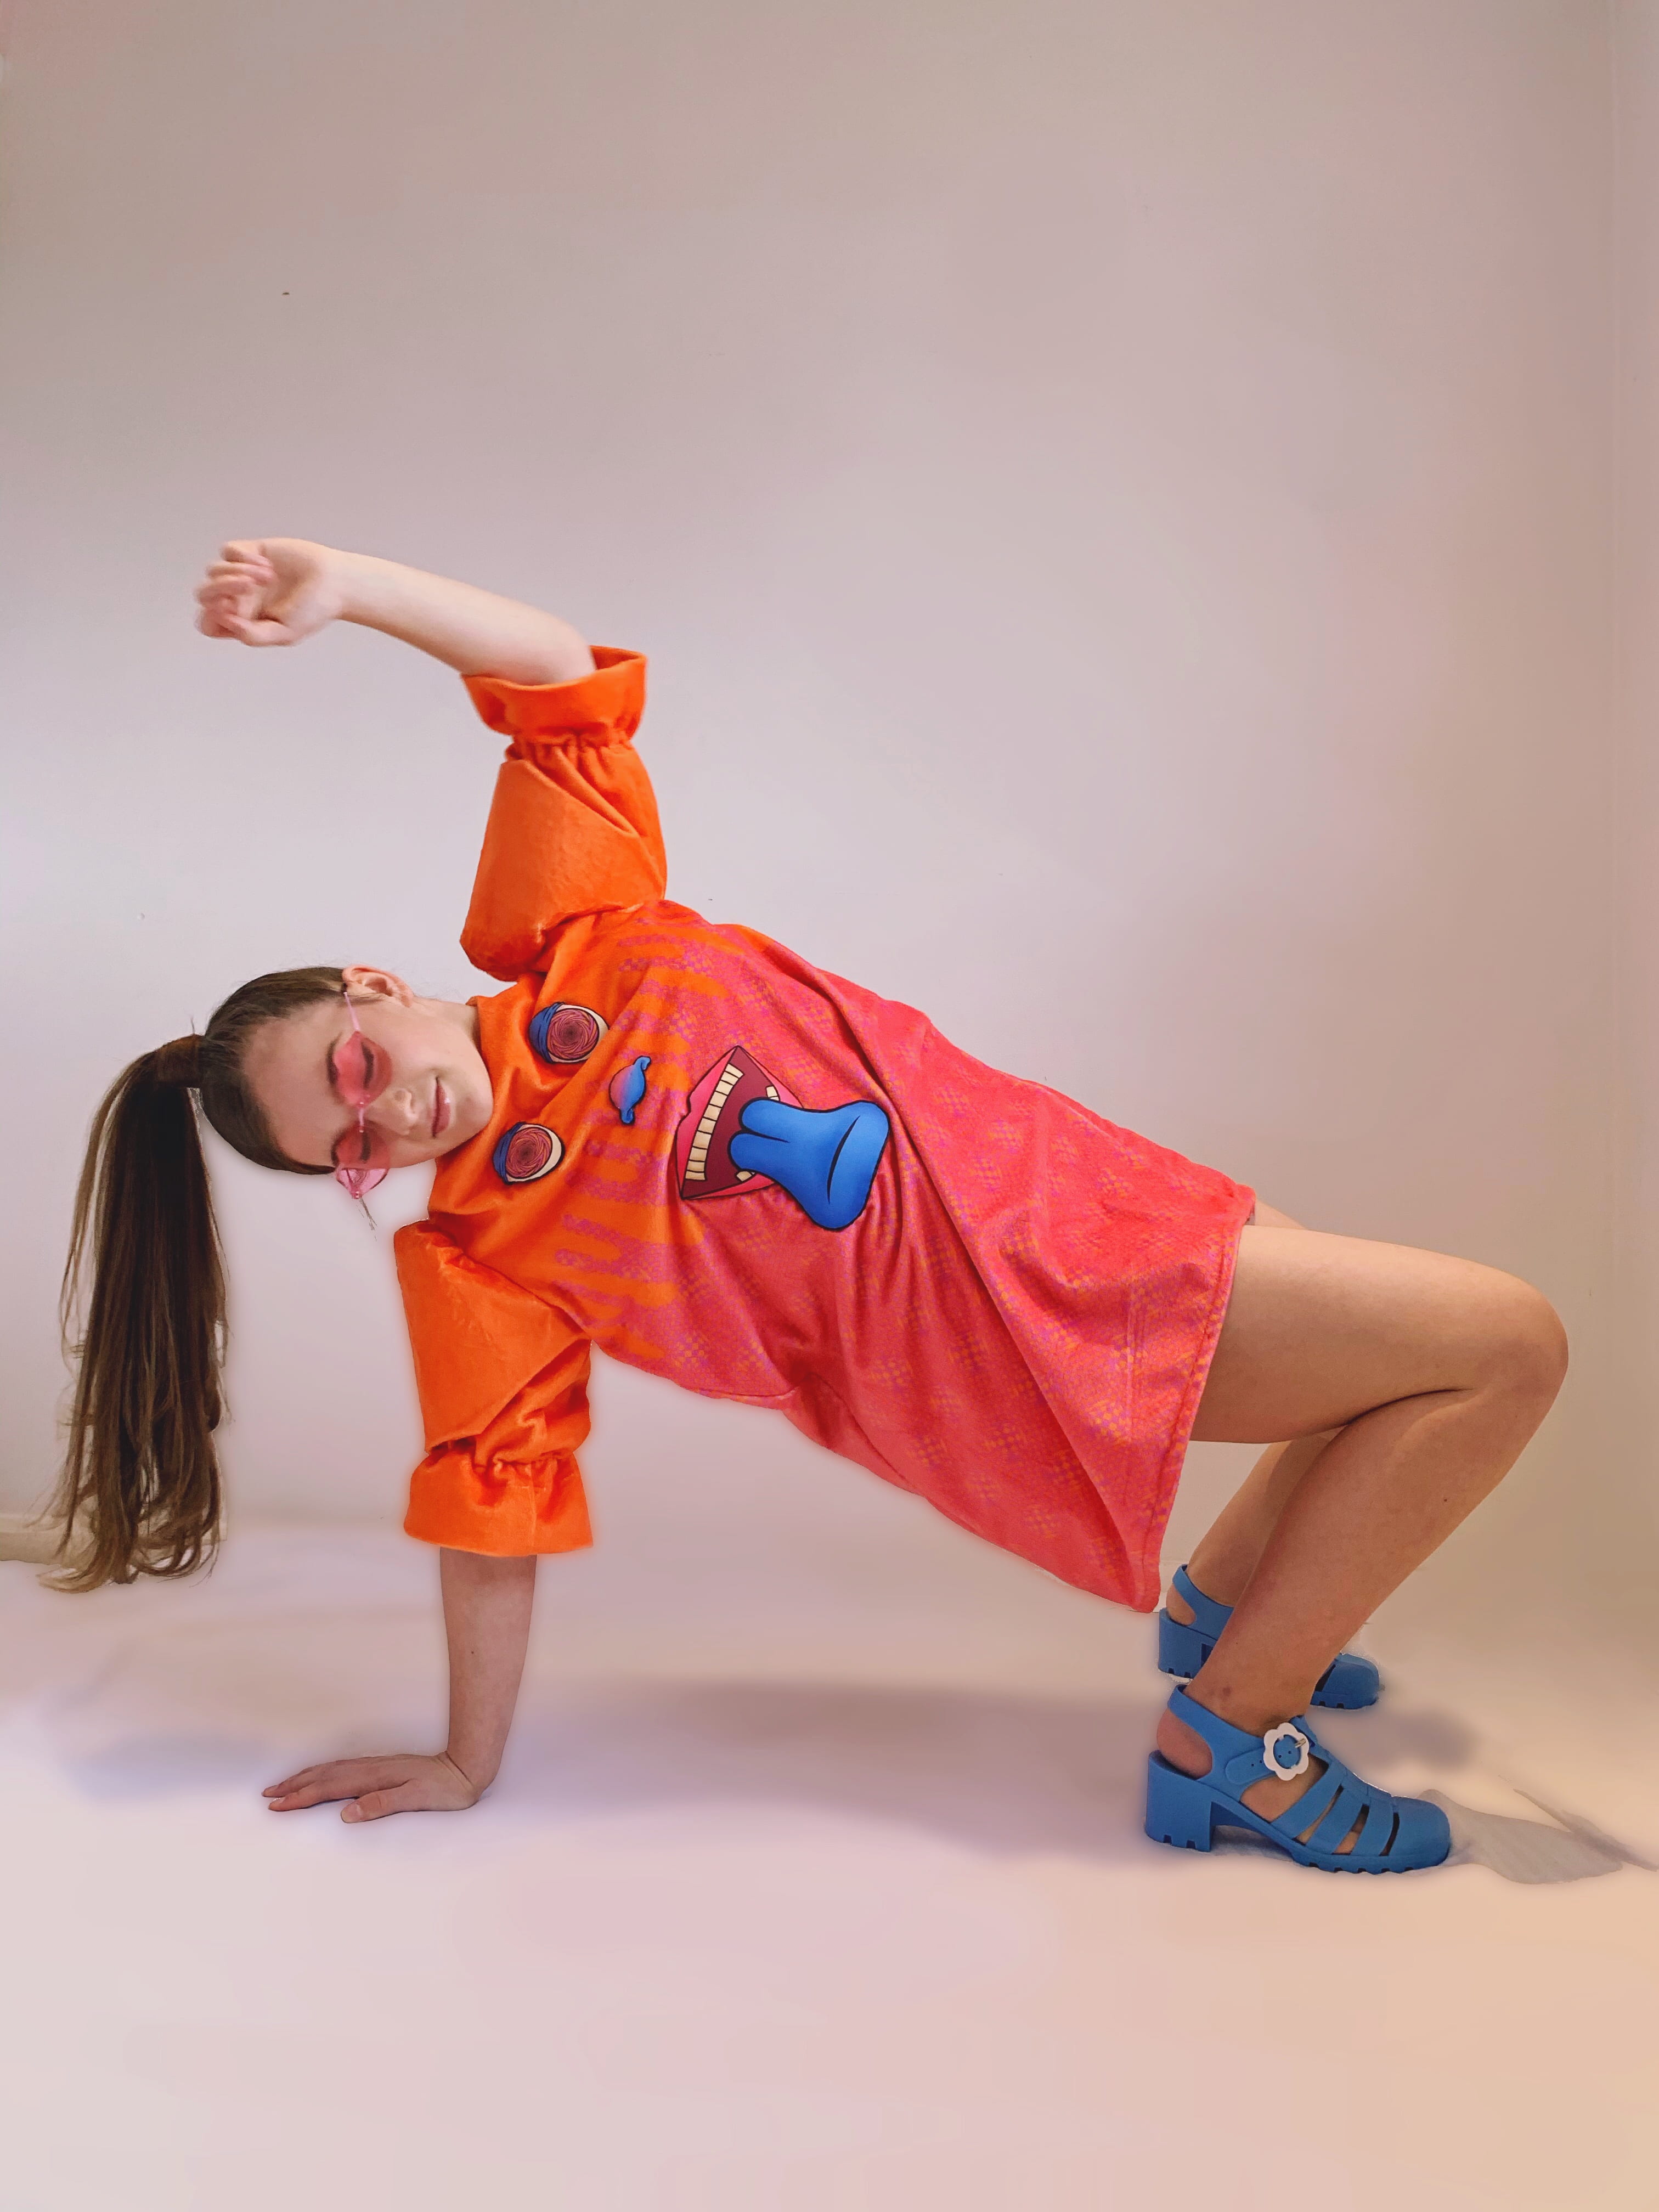 Photograph of a girl posing on the floor in an item in the 'Let's Get Trippy' collection.